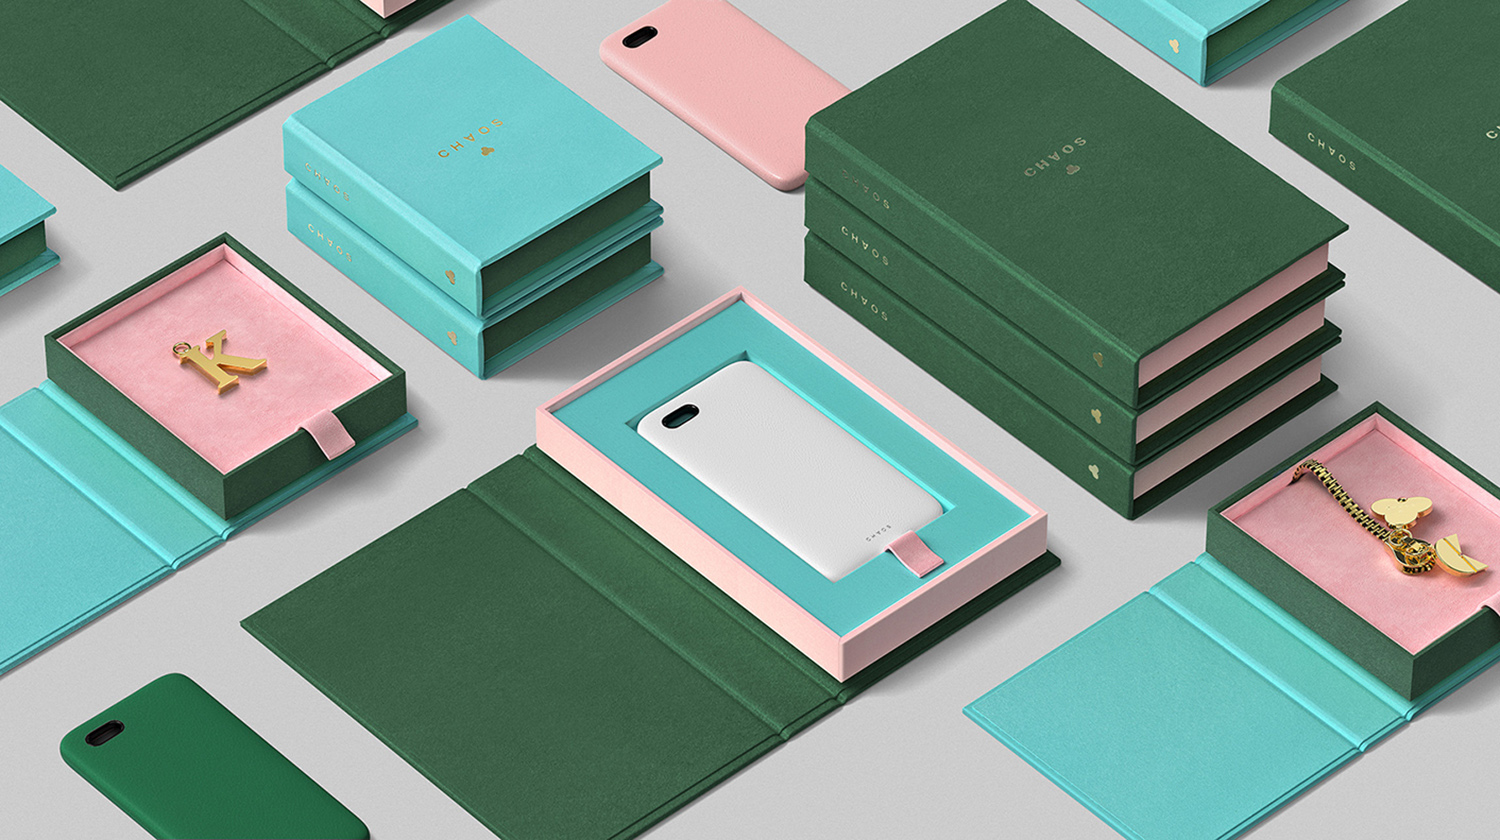 Packaging design featuring Colorplan papers and boards by Socio Design for luxury lifestyle accessory brand Chaos